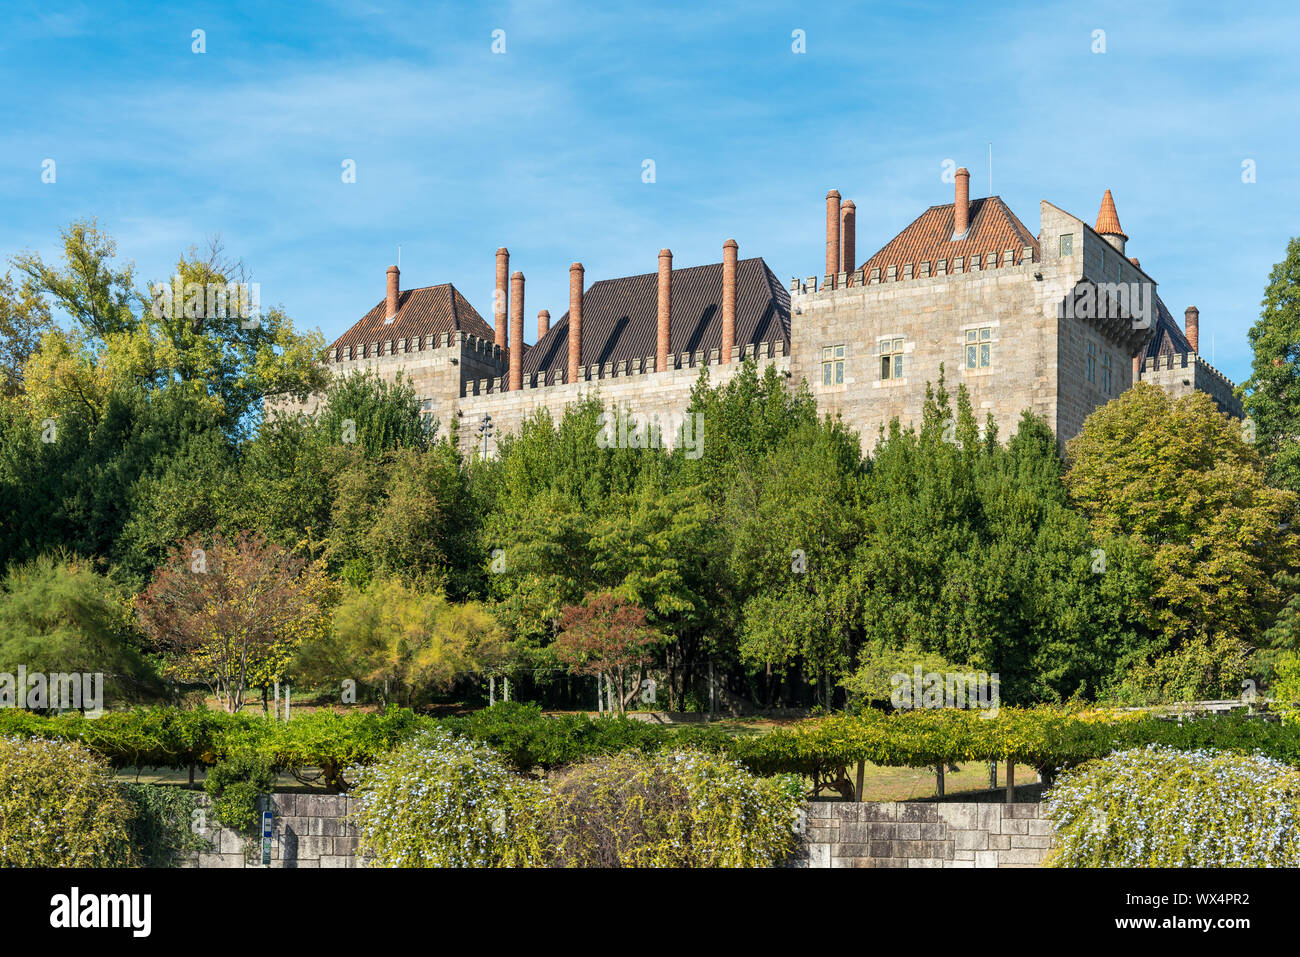 Palace of the Dukes of Braganza, a medieval estate in Guimarães, Portugal Stock Photo